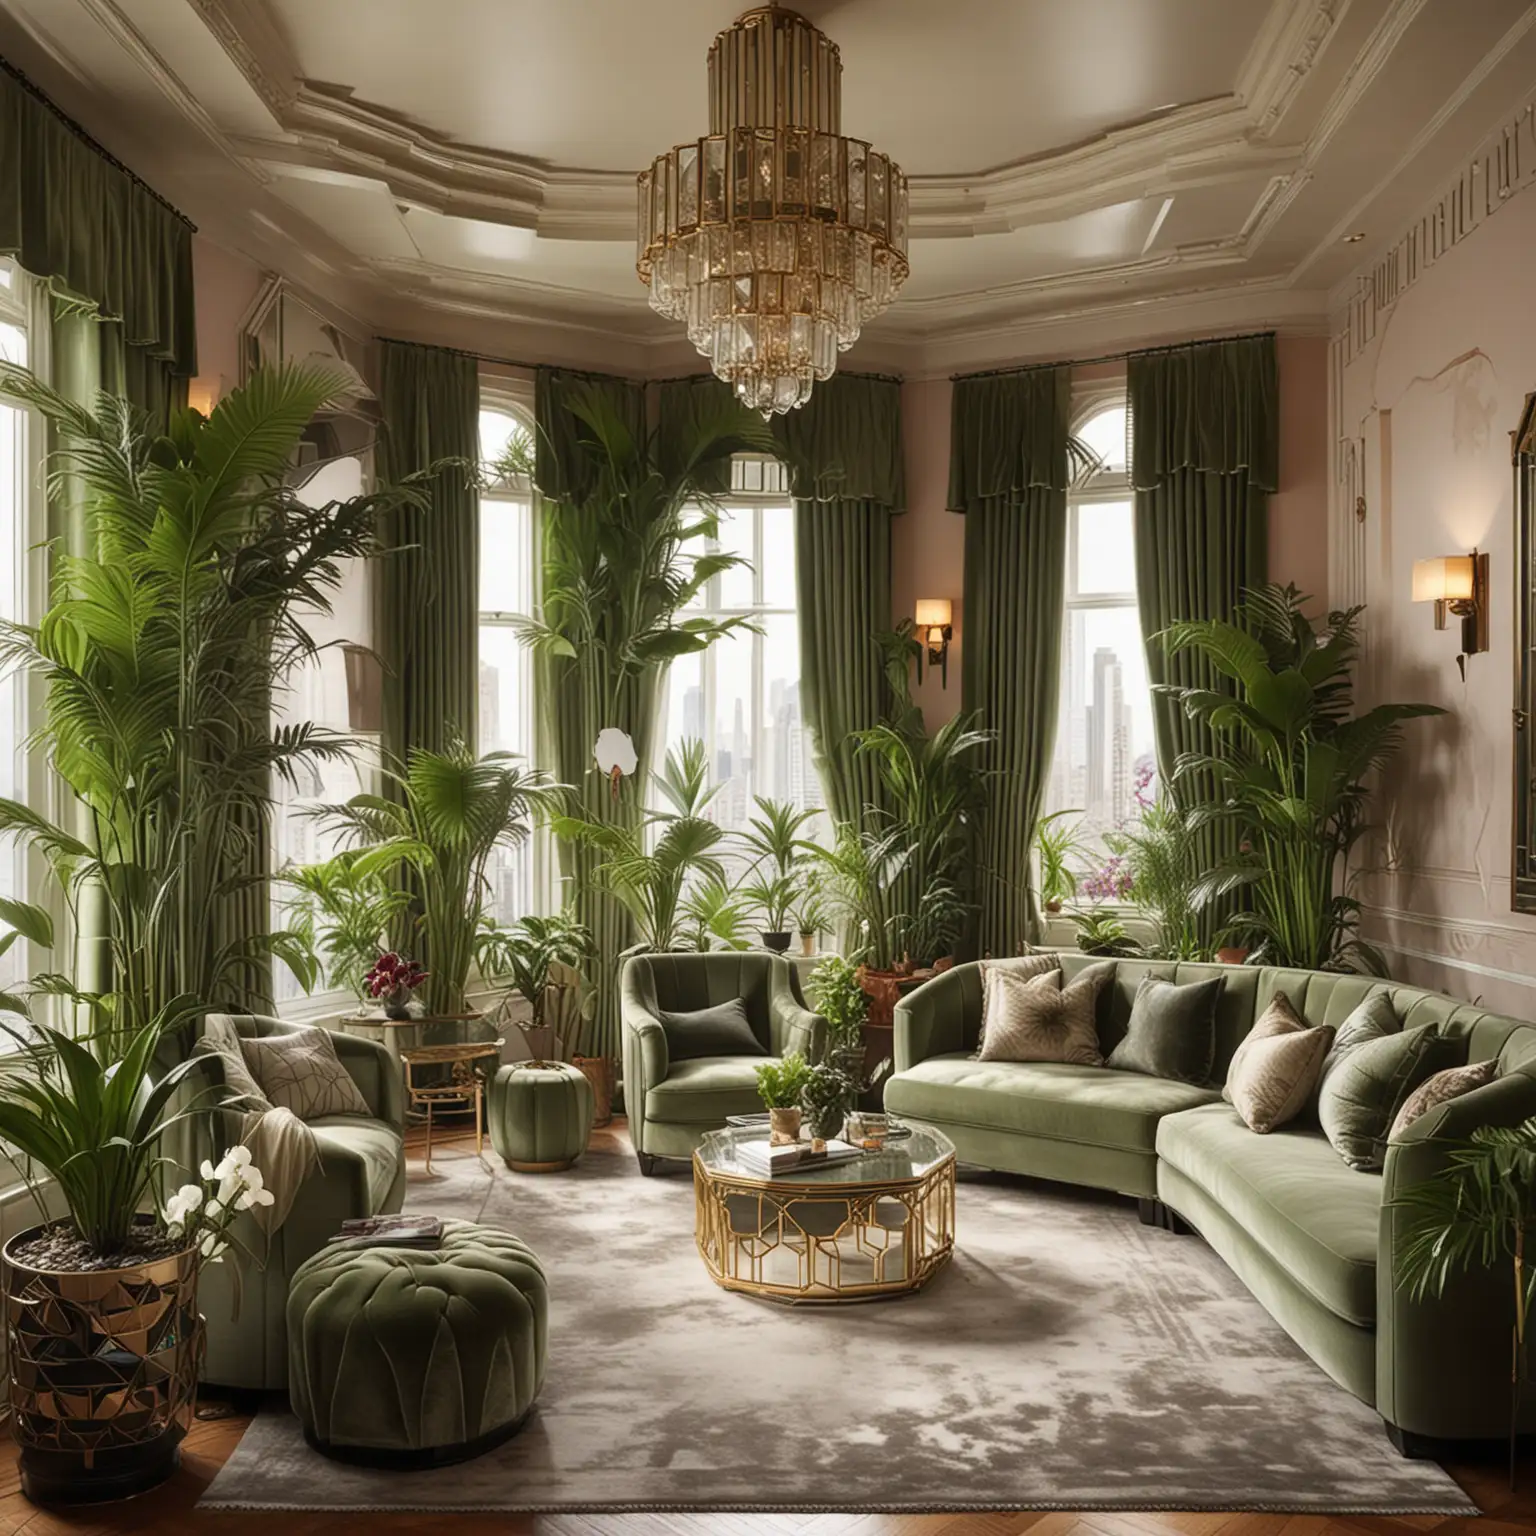 Cozy Yet Spacious Art Deco Sitting Room with Plants: Create a cozy yet spacious sitting room inspired by the Art Deco era. Use geometric patterns, plush velvet furniture, and mirrored surfaces. Incorporate potted palms and orchids for a touch of greenery. The room should have large windows overlooking a city skyline, with glimpses of art deco skyscrapers in the distance.